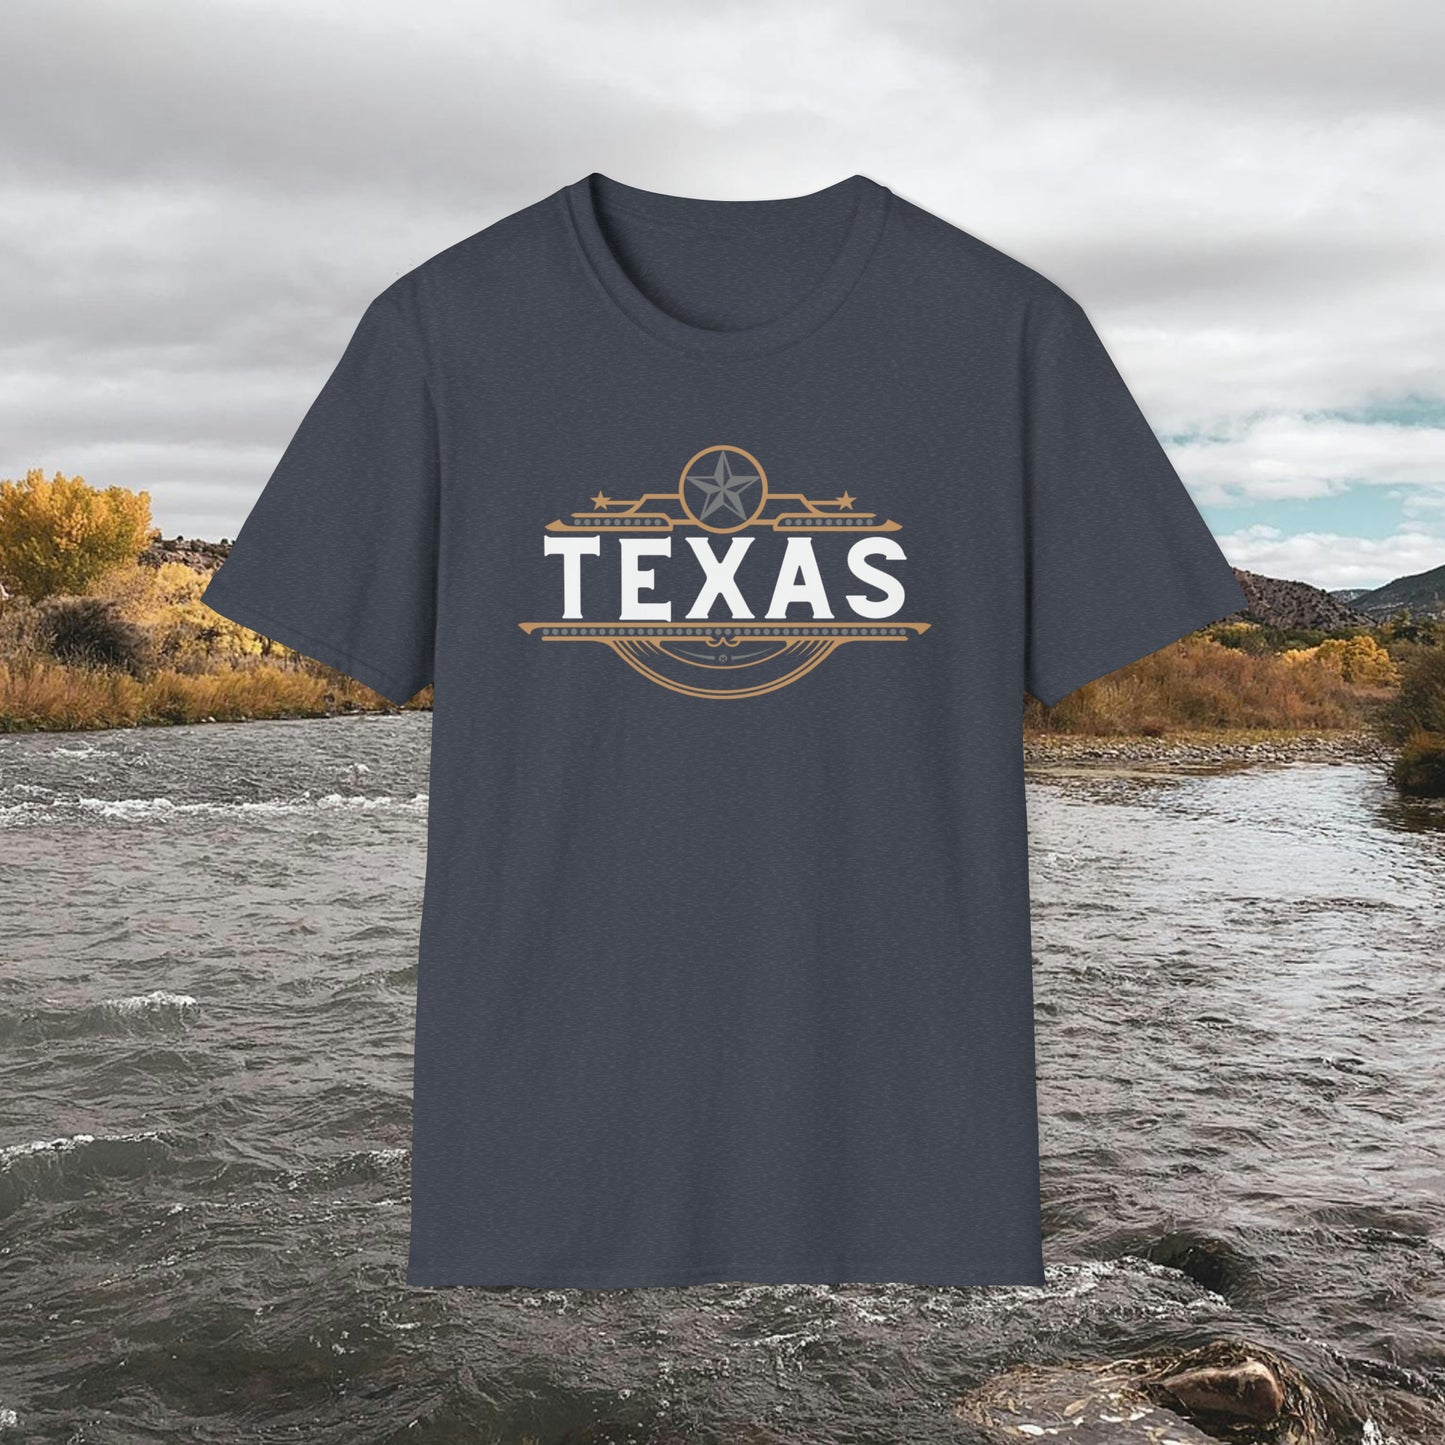 Texas T-shirt Elegant Gold Banner, Silver Star, Accents on a beautiful Graphic Softstyle T-Shirt Unisex Designs by MII